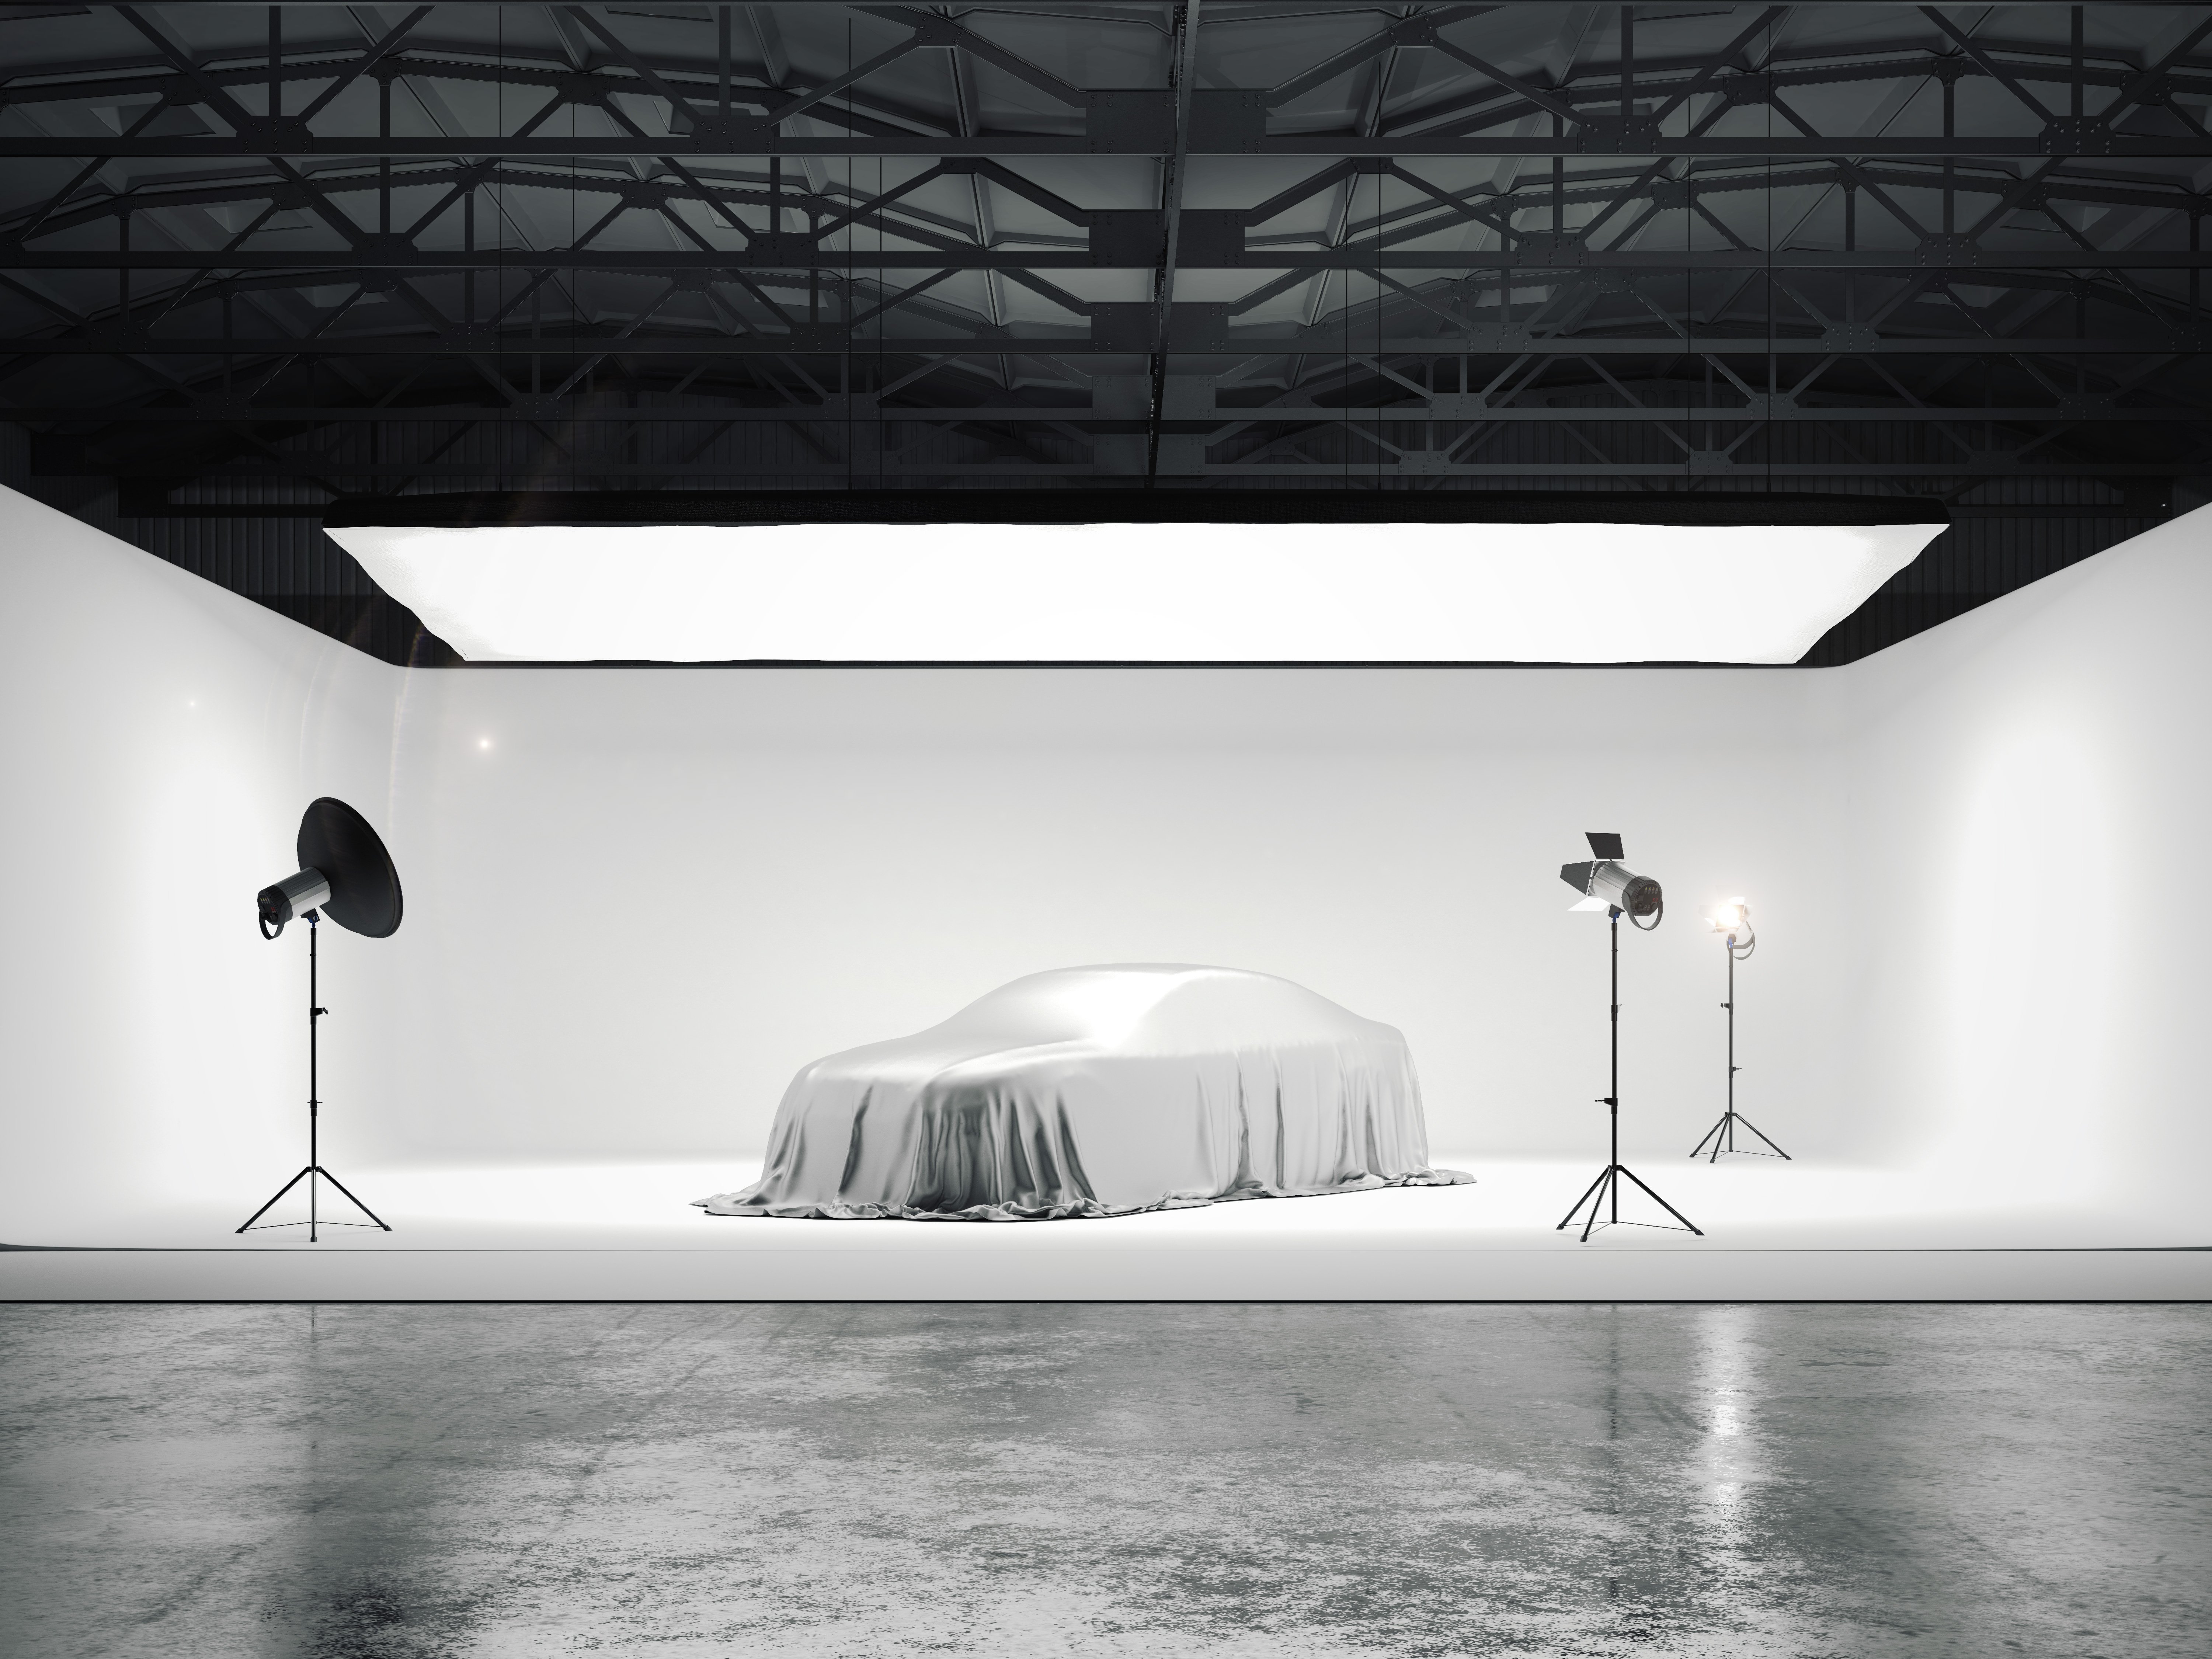 Large photographic studio with a car and several light sources